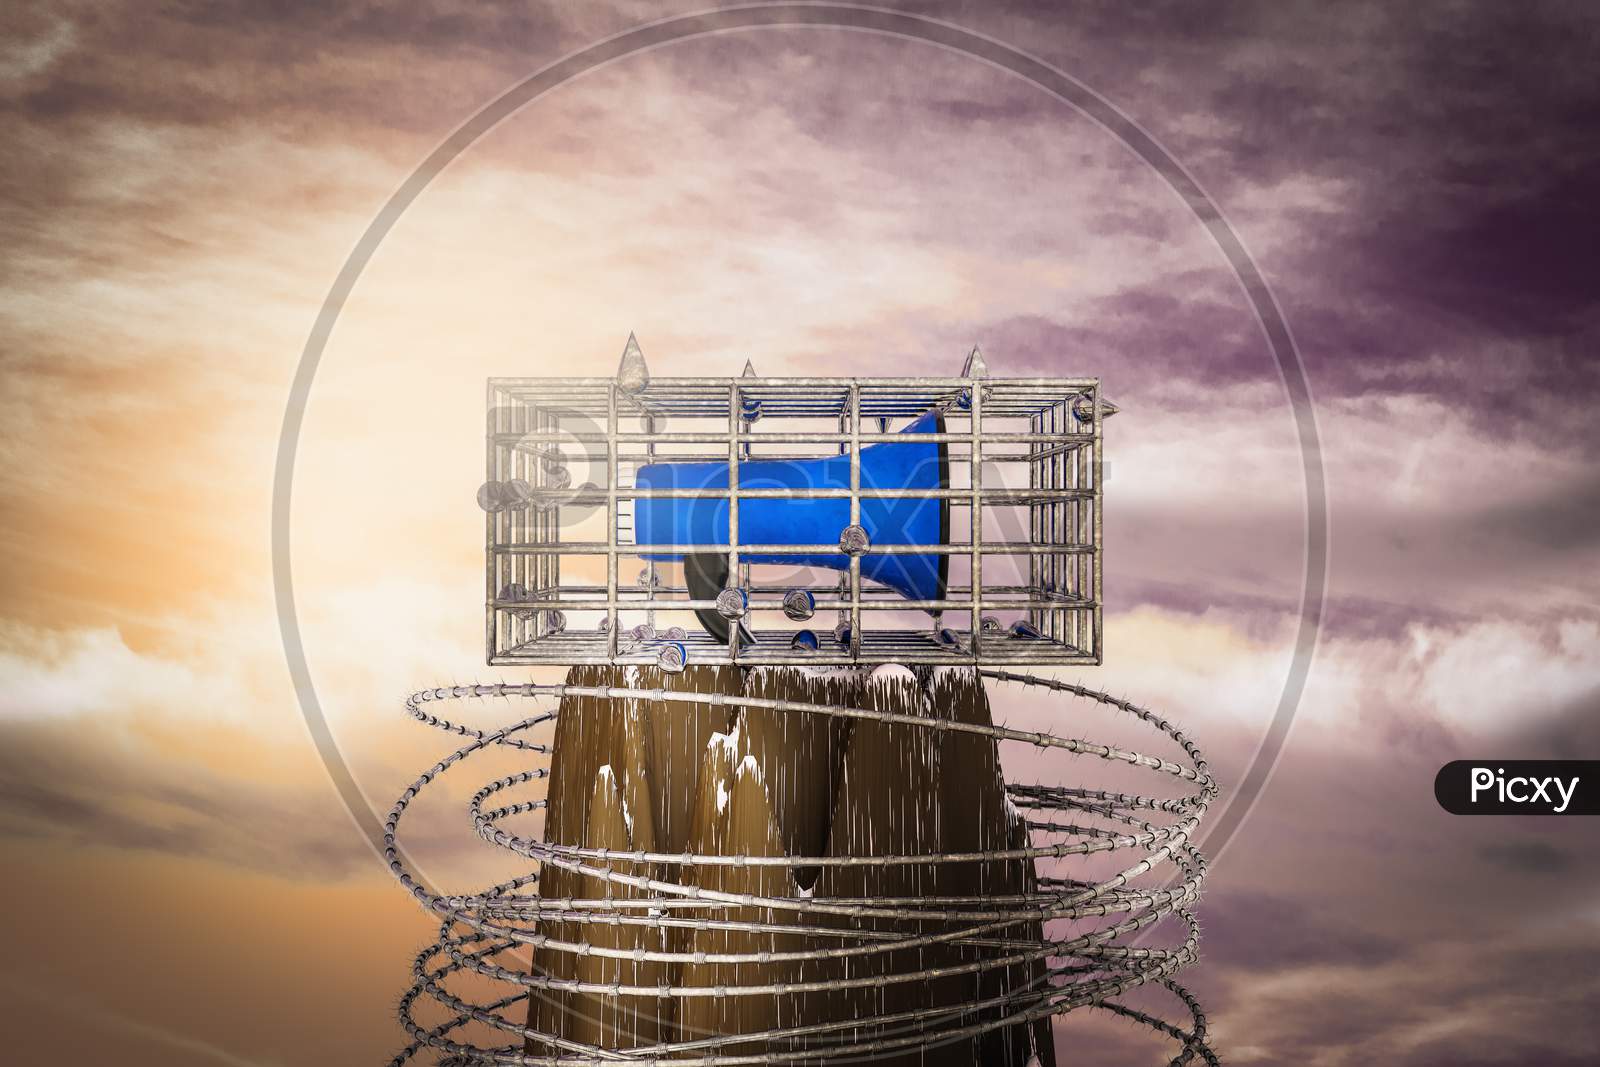 A Loudspeaker In A Cage On The Top Of A Mountain At Sunset Magenta Day. A Loudspeaker Is Prisoner In Metal Cage Or Refer A Friend Concept. 3D Illustration